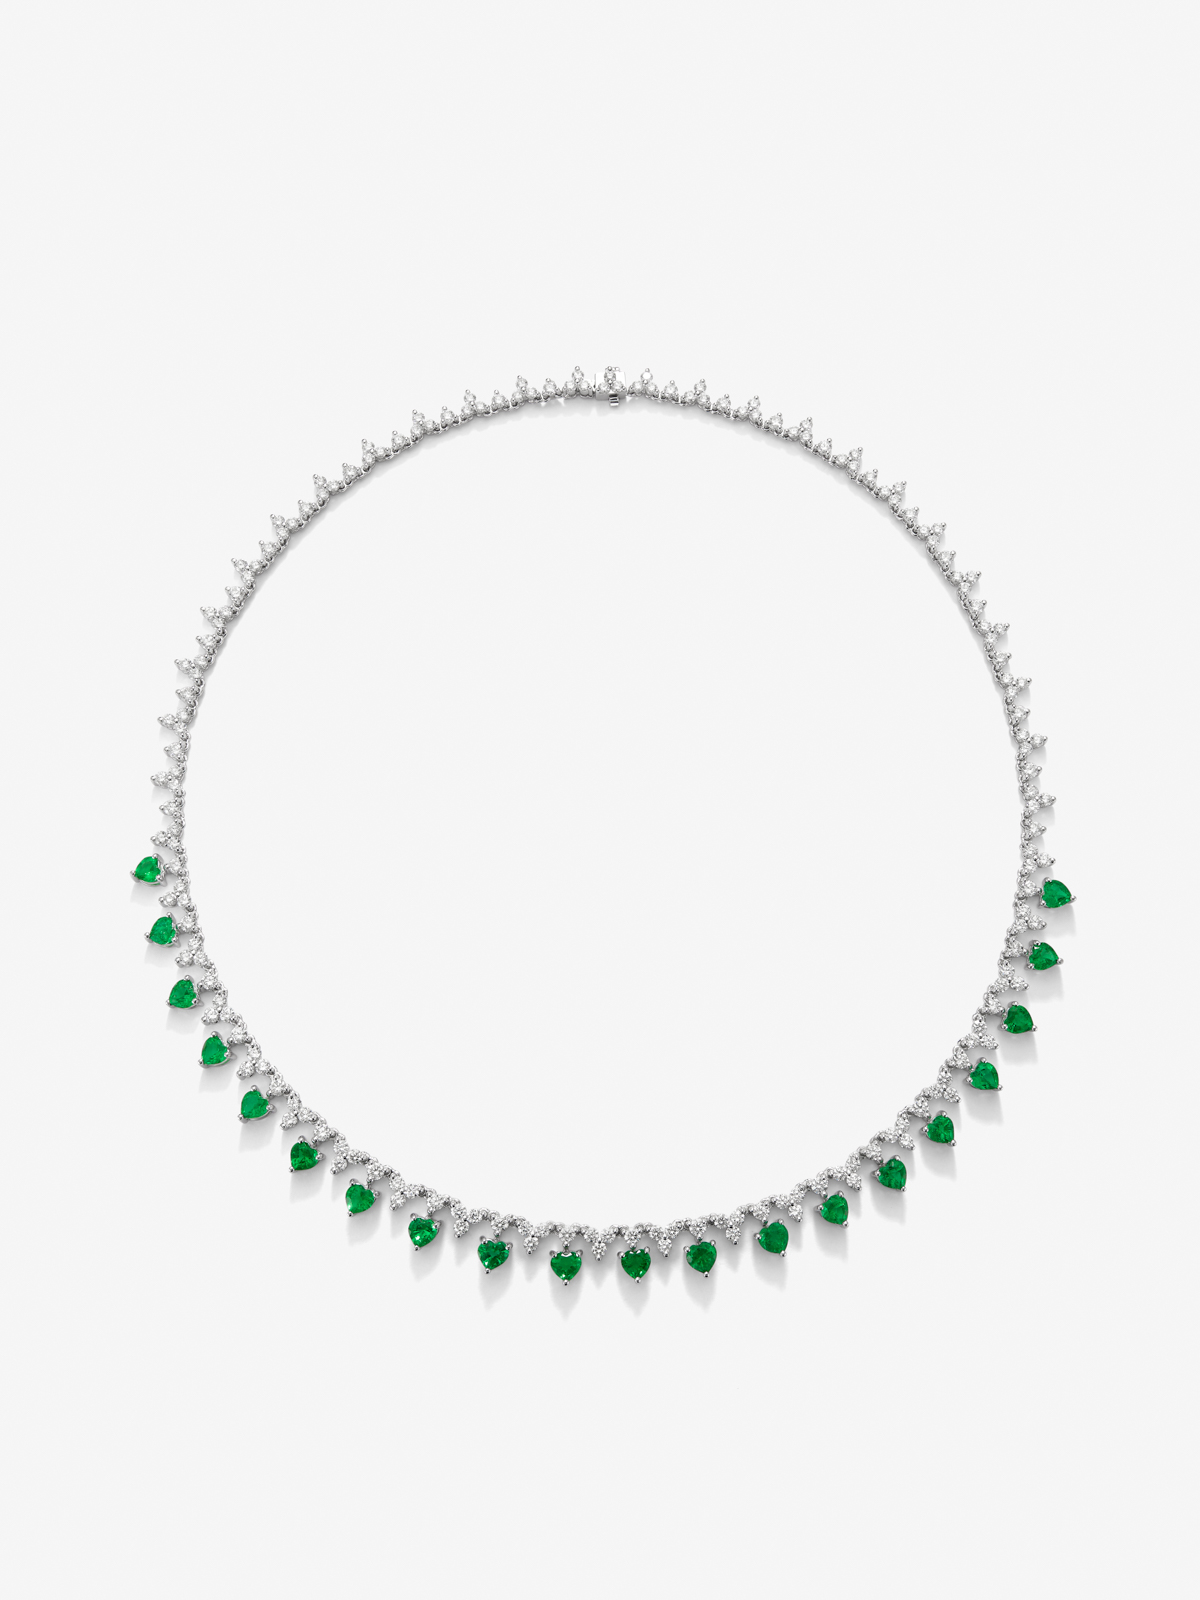 18K White Gold Rivière Necklace with green emeralds in the heart size of 4.42 cts and white diamonds in 6.76 cts bright size